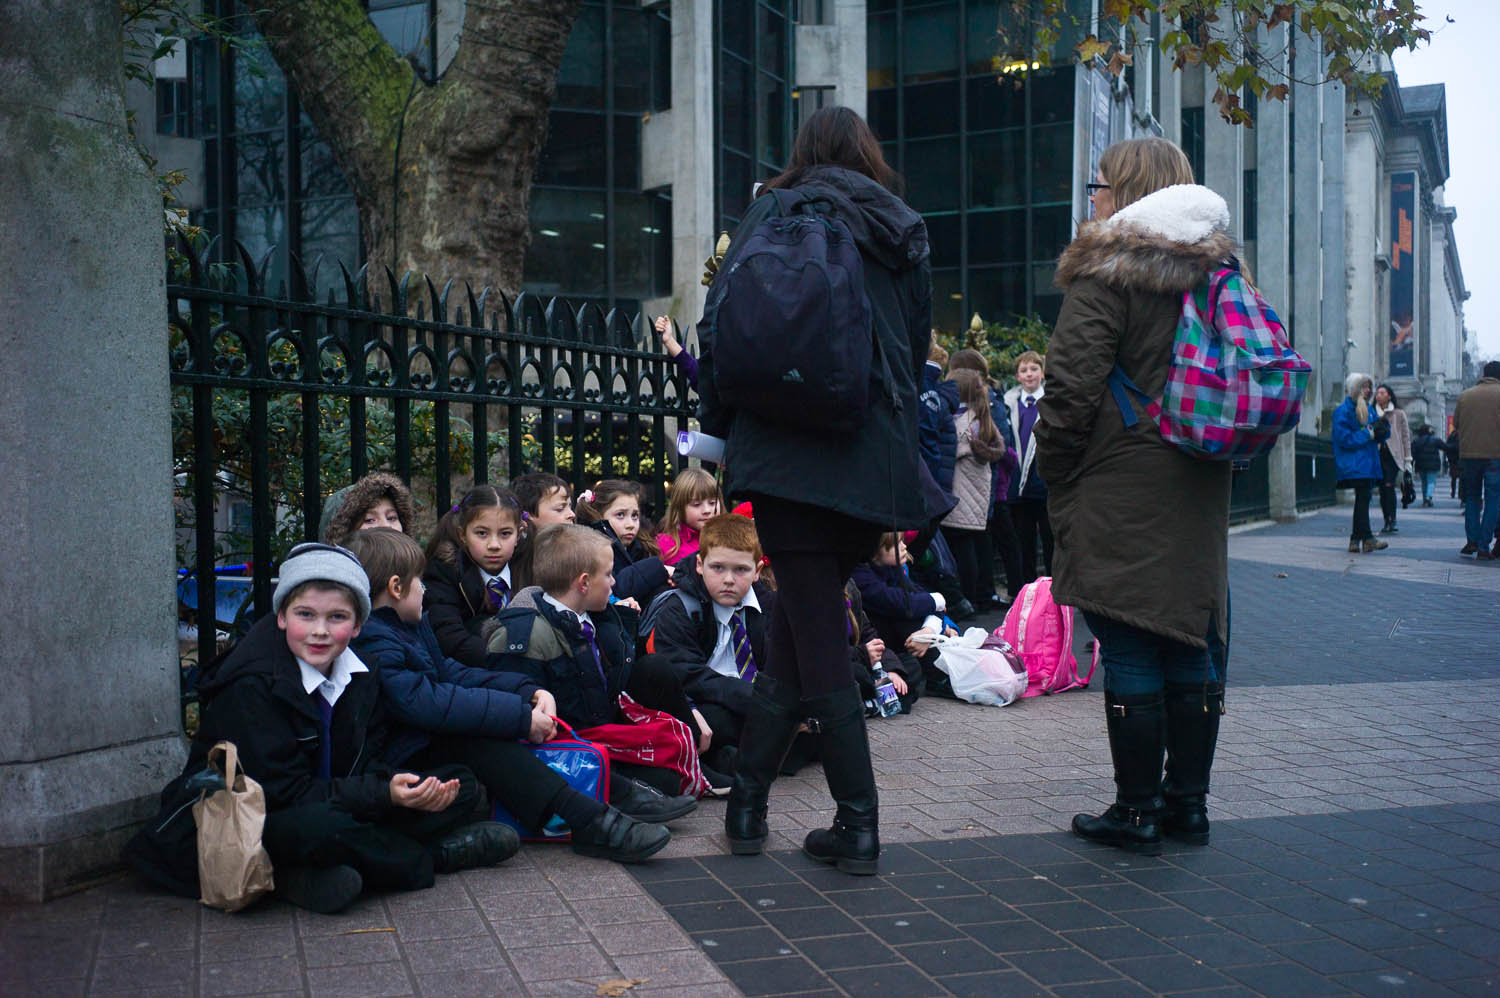 Schoolchildren are seated against a fence near the museums in London